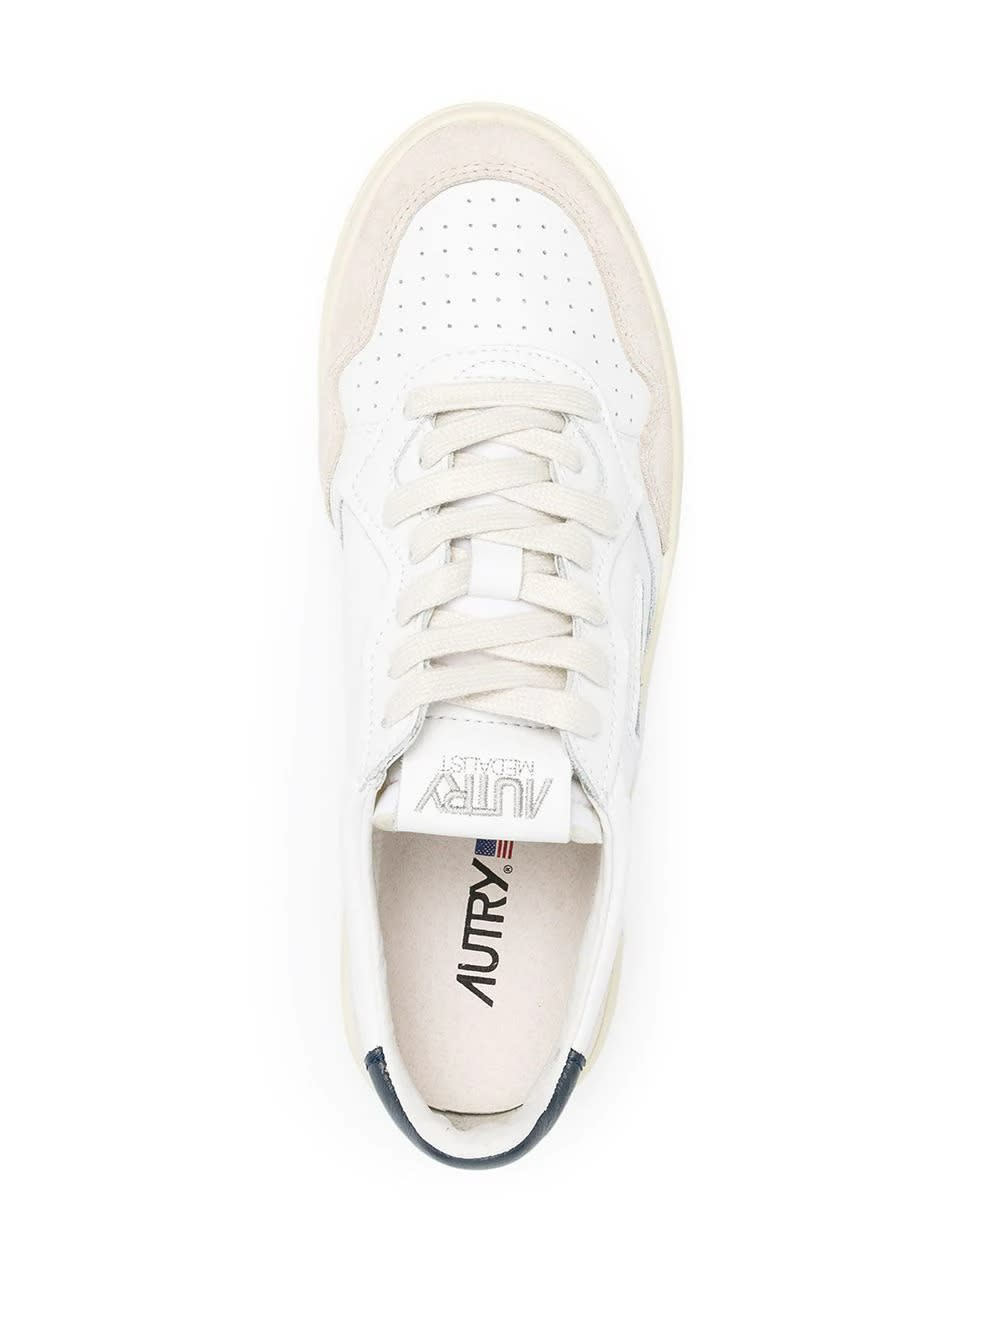 Shop Autry Medalist Low Sneakers In White And Navy Blue Suede And Leather